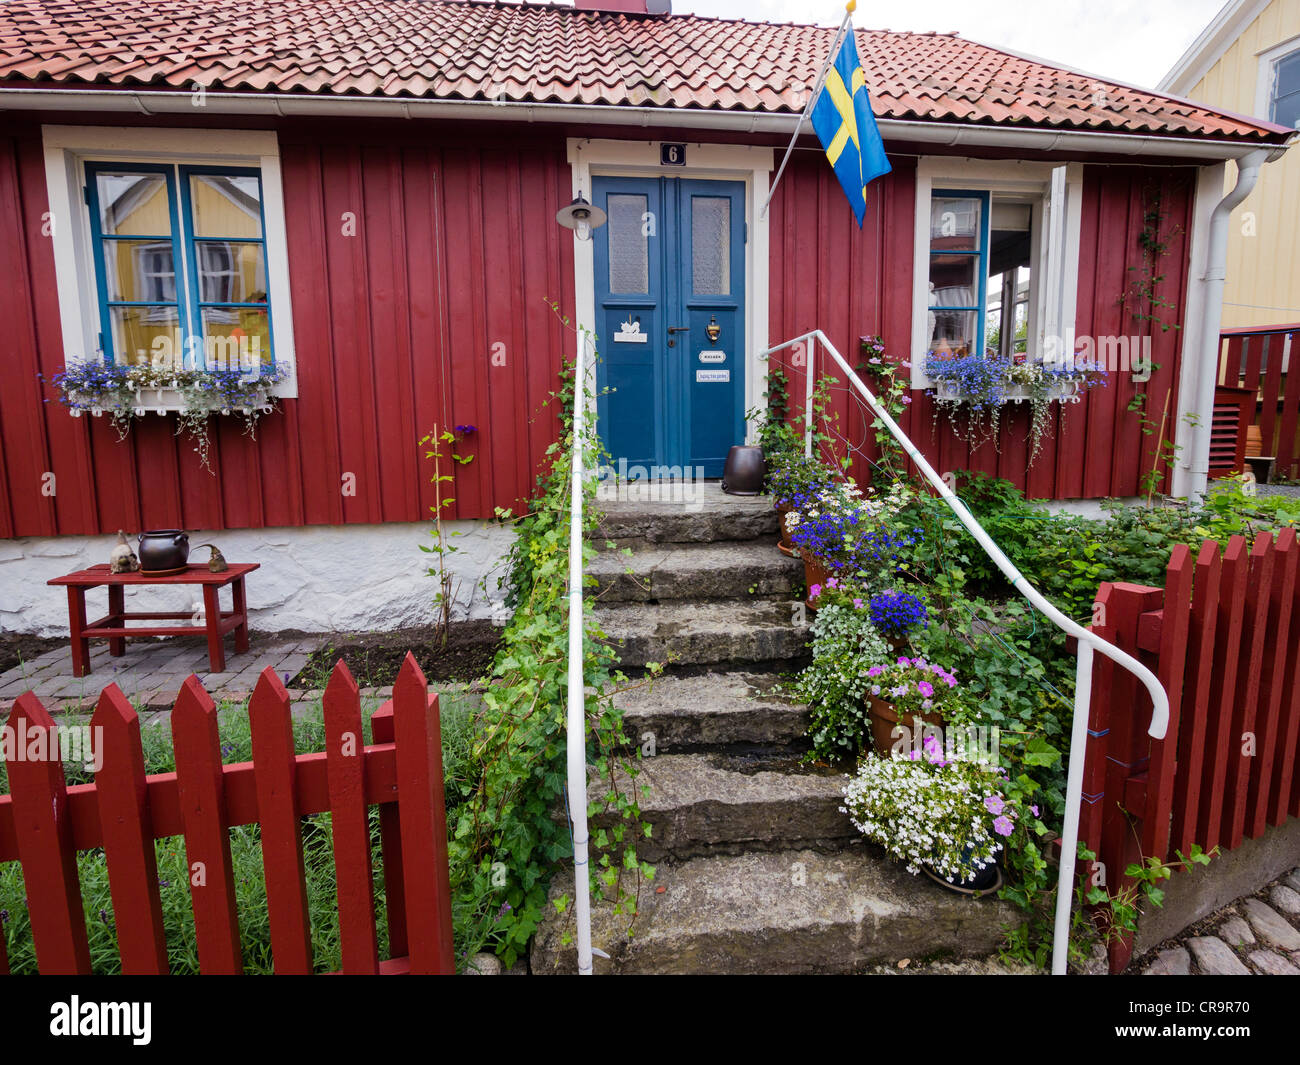 A typical swedish residential house, painted in traditional falun red, at Besvärsgatan in Oskarshamn. Stock Photo